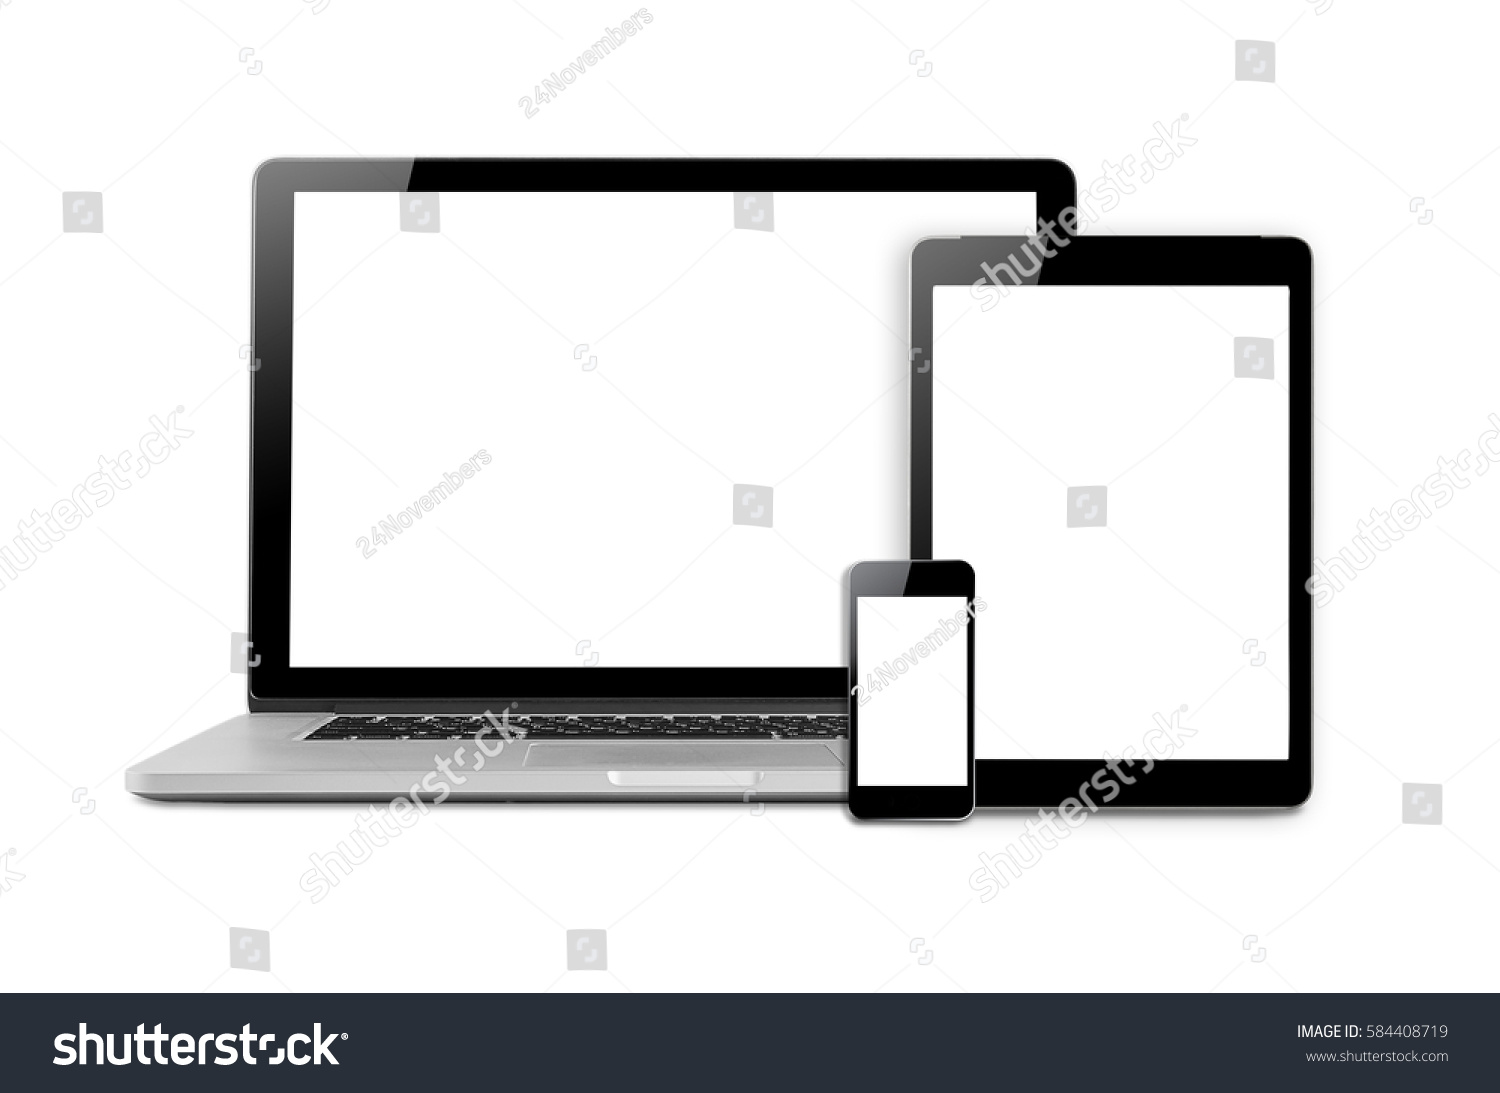 Laptops, tablets and mobile phones. Mock up image of electronic gadgets isolated on white background. #584408719